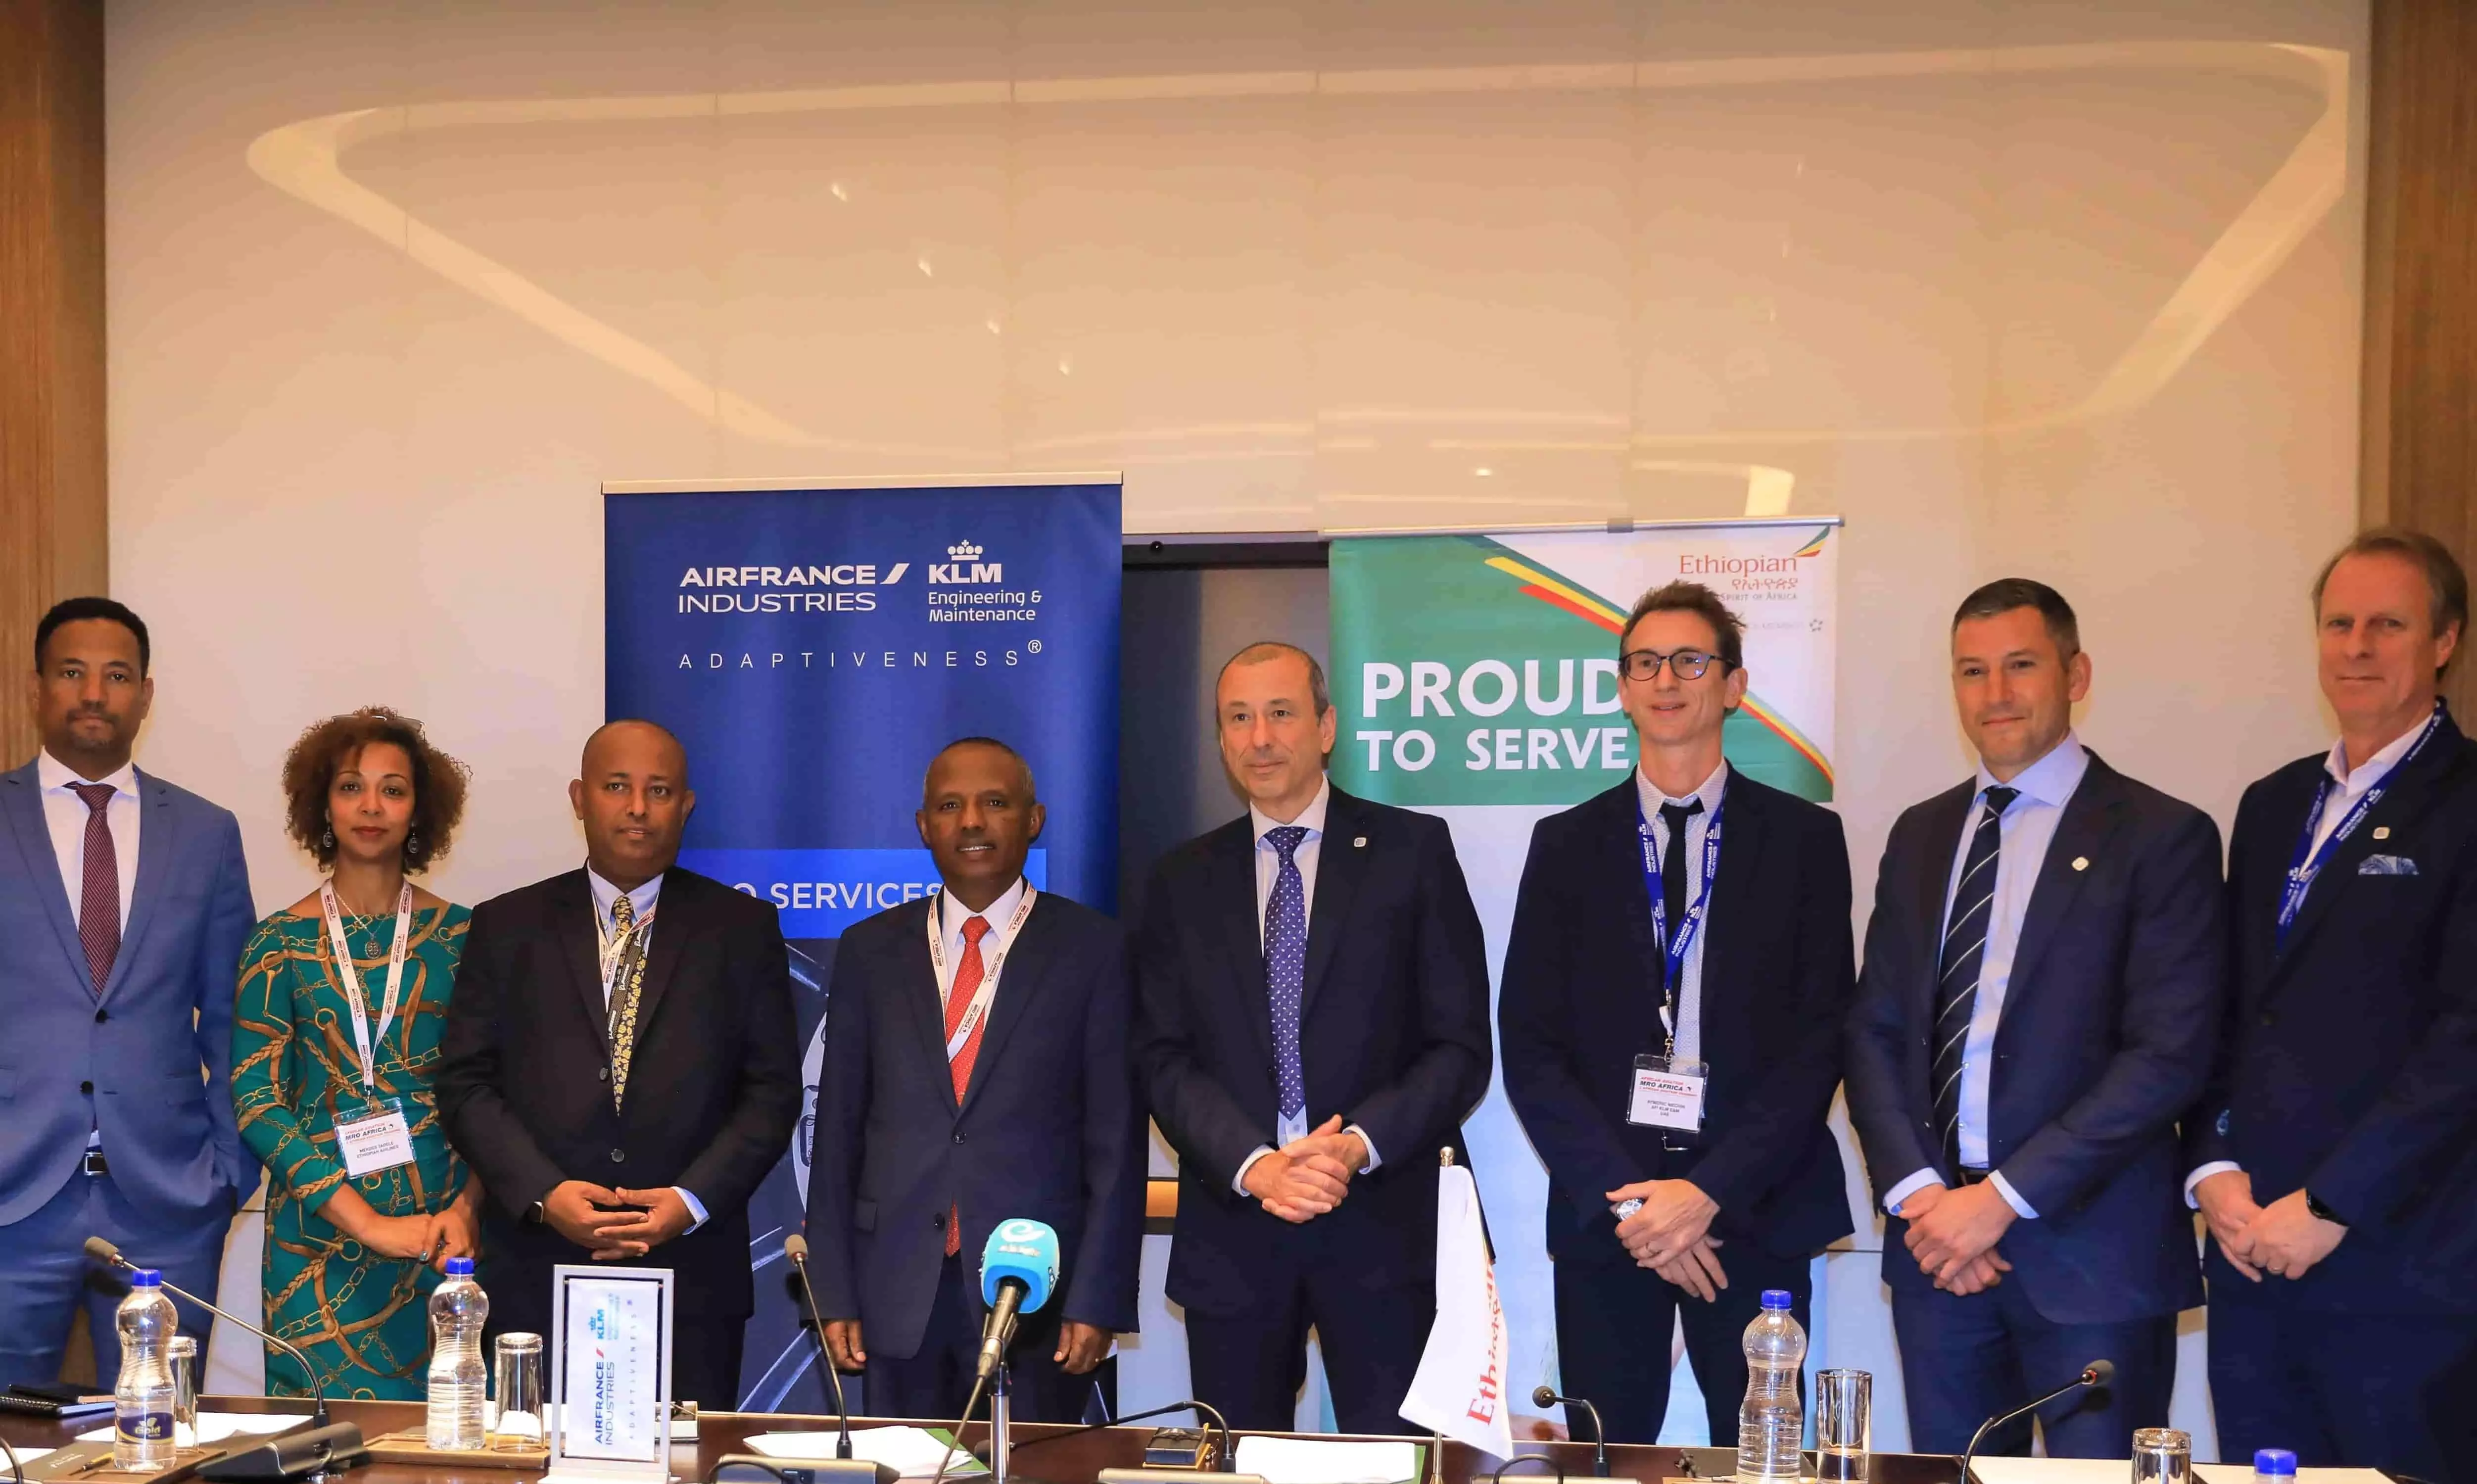 Ethiopian partners with AFI KLM E&M for Boeing 777 fleets support